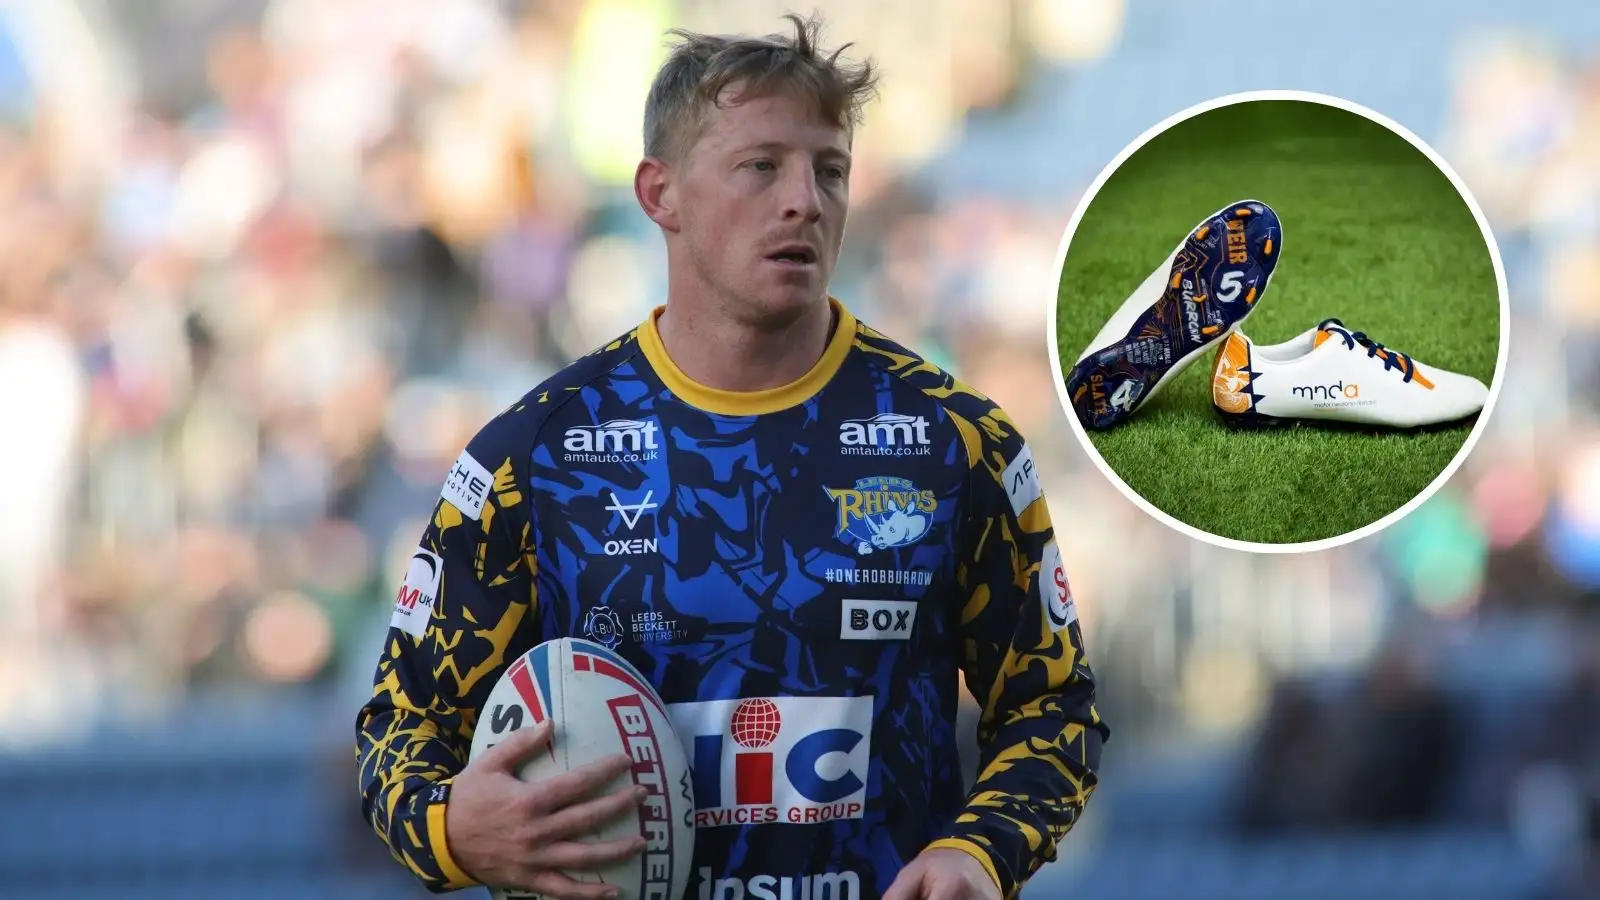 Leeds Rhinos new boy dons special boots in support of Rob Burrow and MND Community